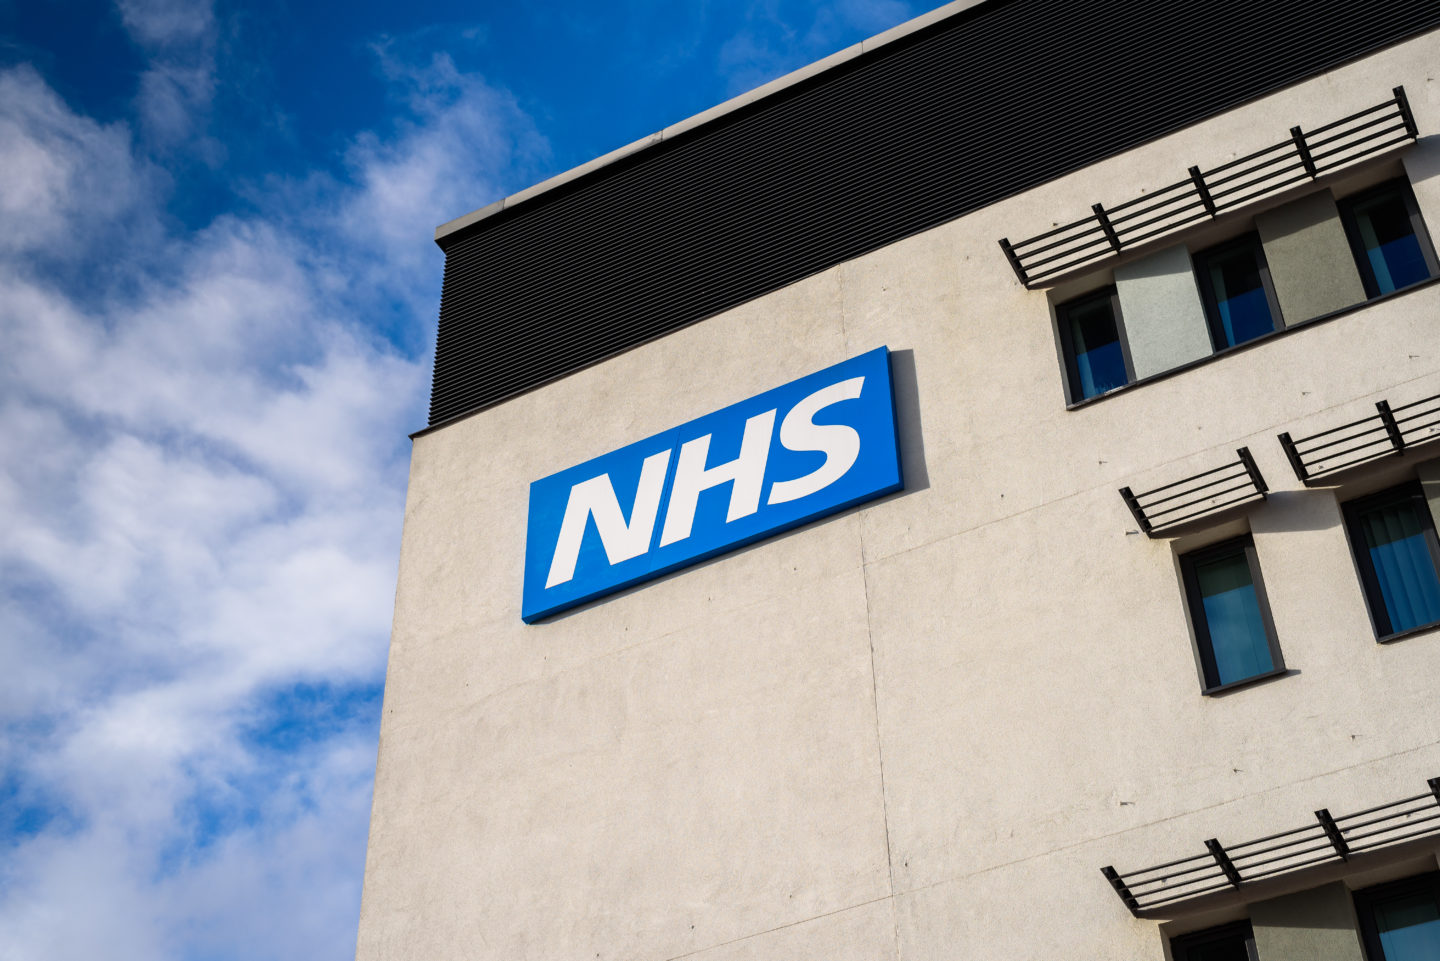 Revealed: allegations of sexual harassment by NHS staff led to at least 25 investigations 8